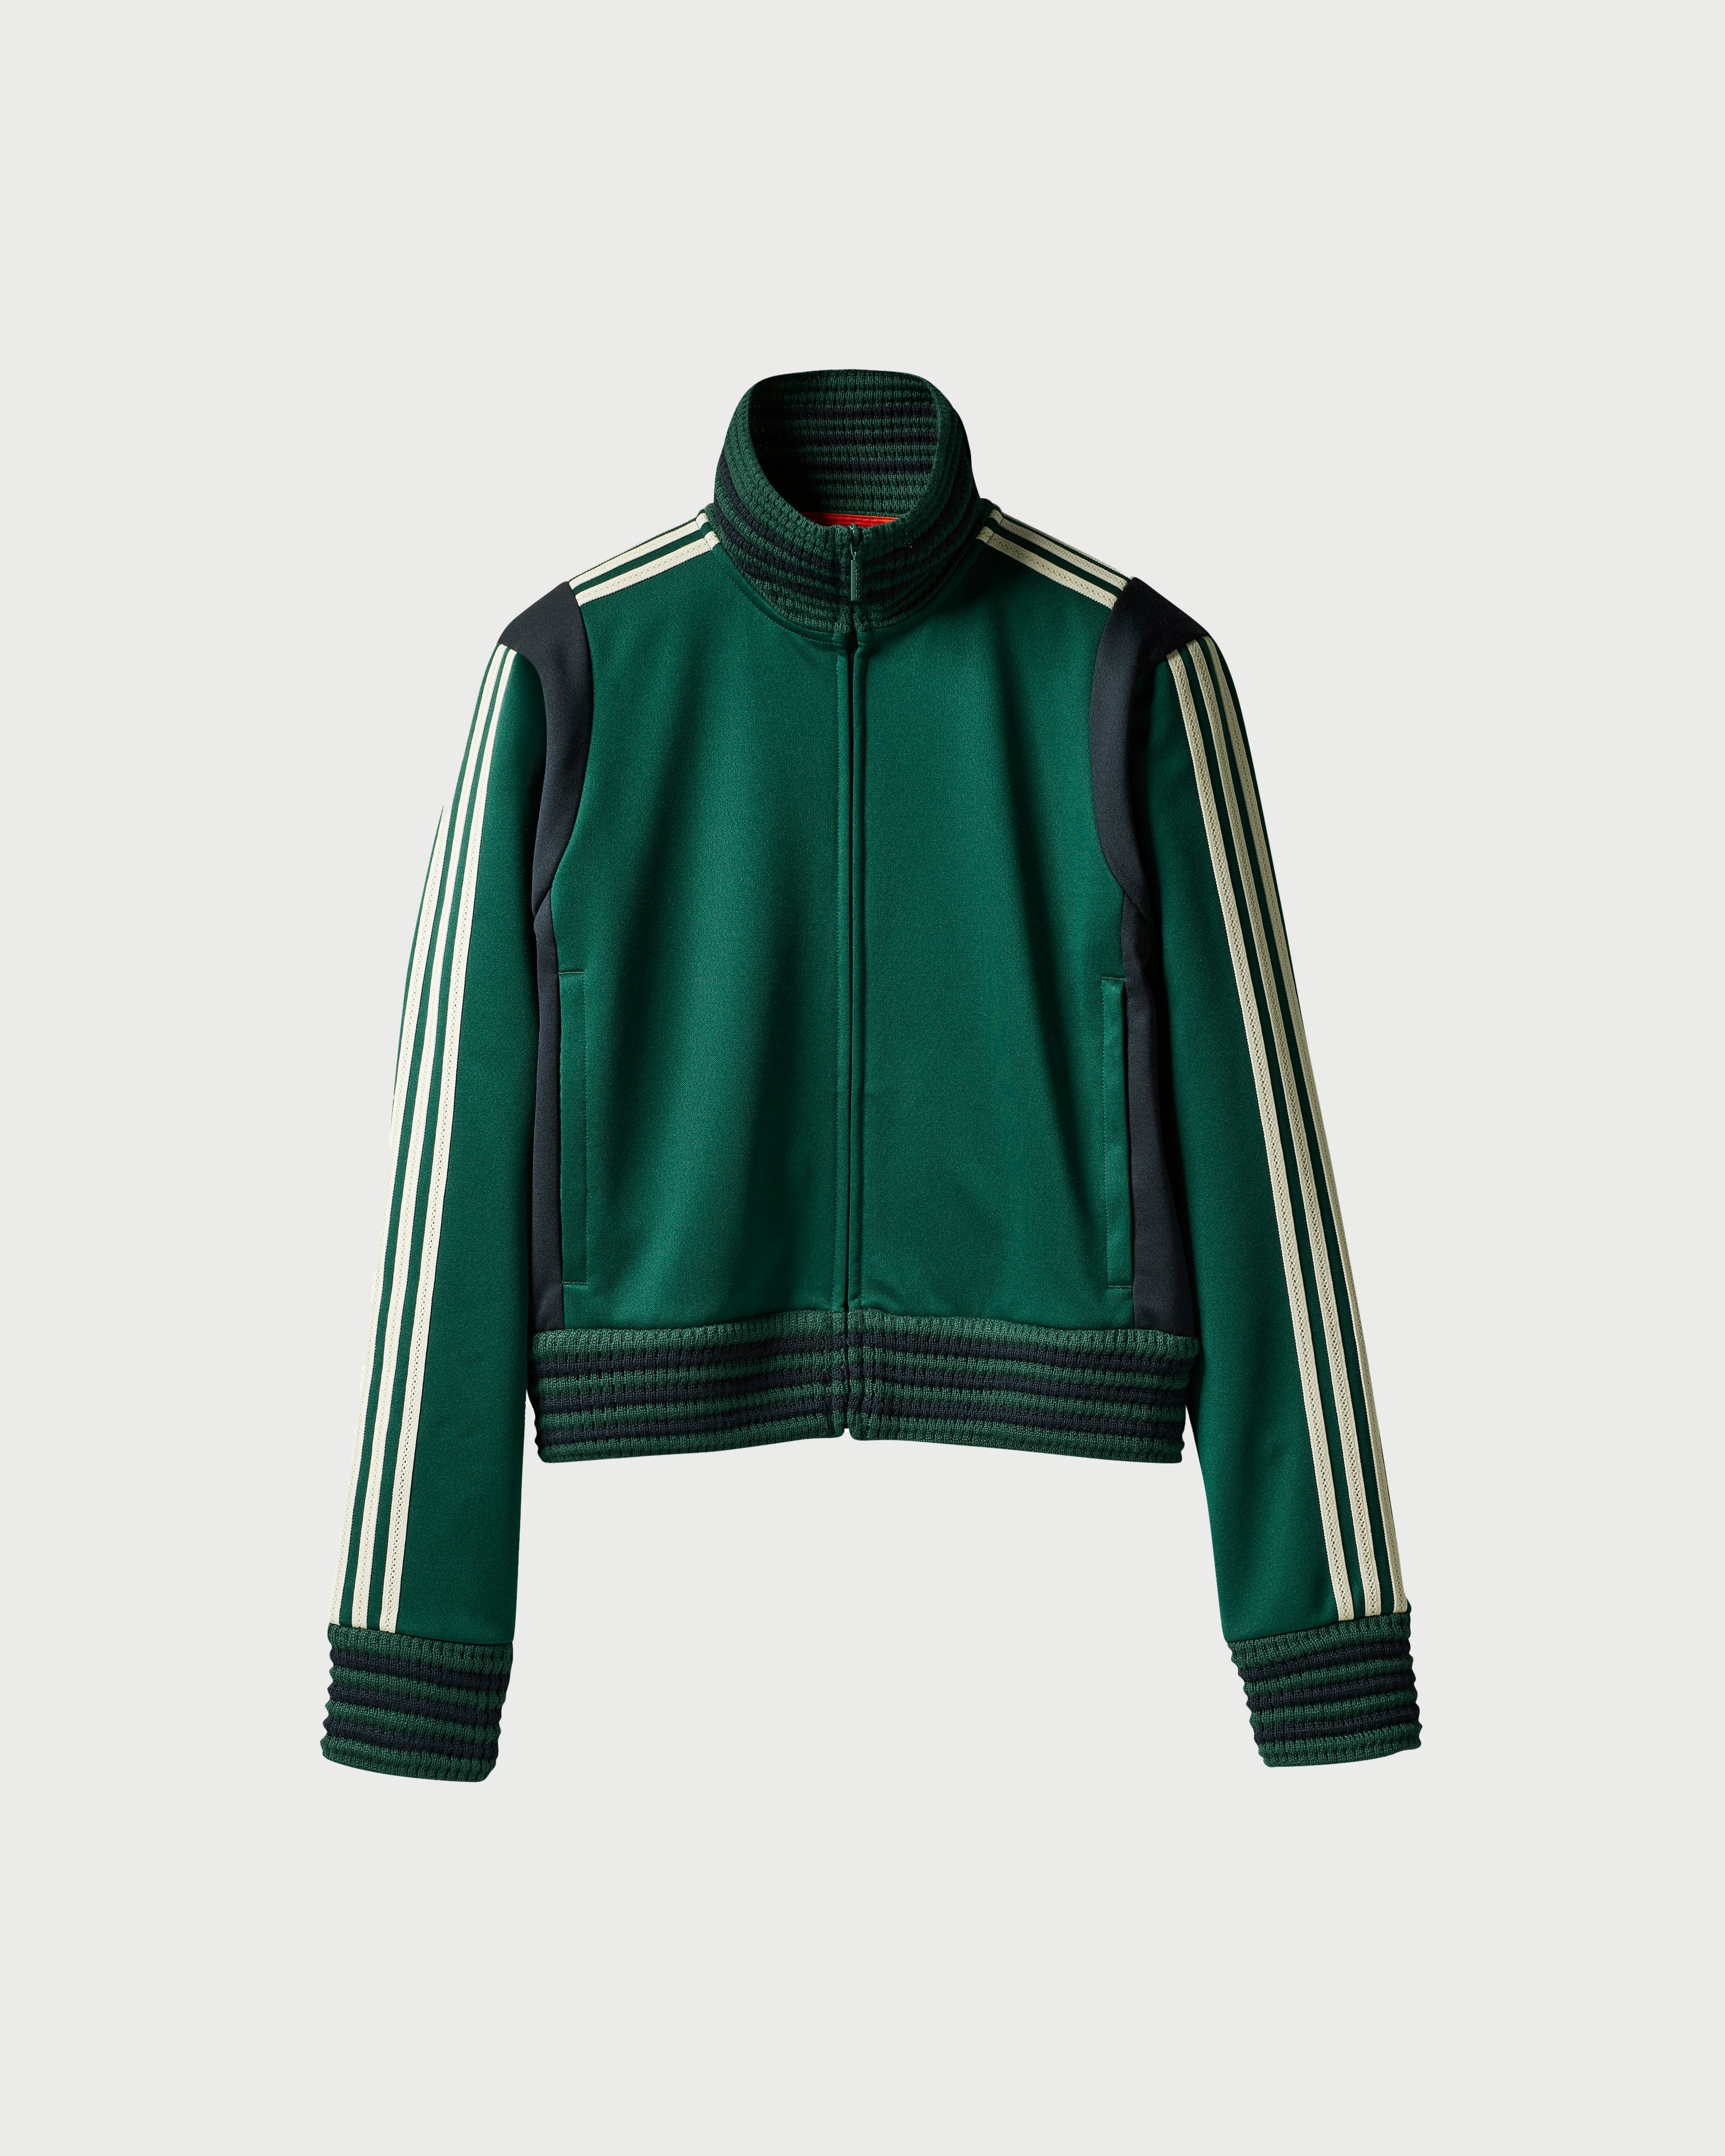 Adidas x Wales Bonner - Lovers Track Top Green - Clothing - Green - Image 1